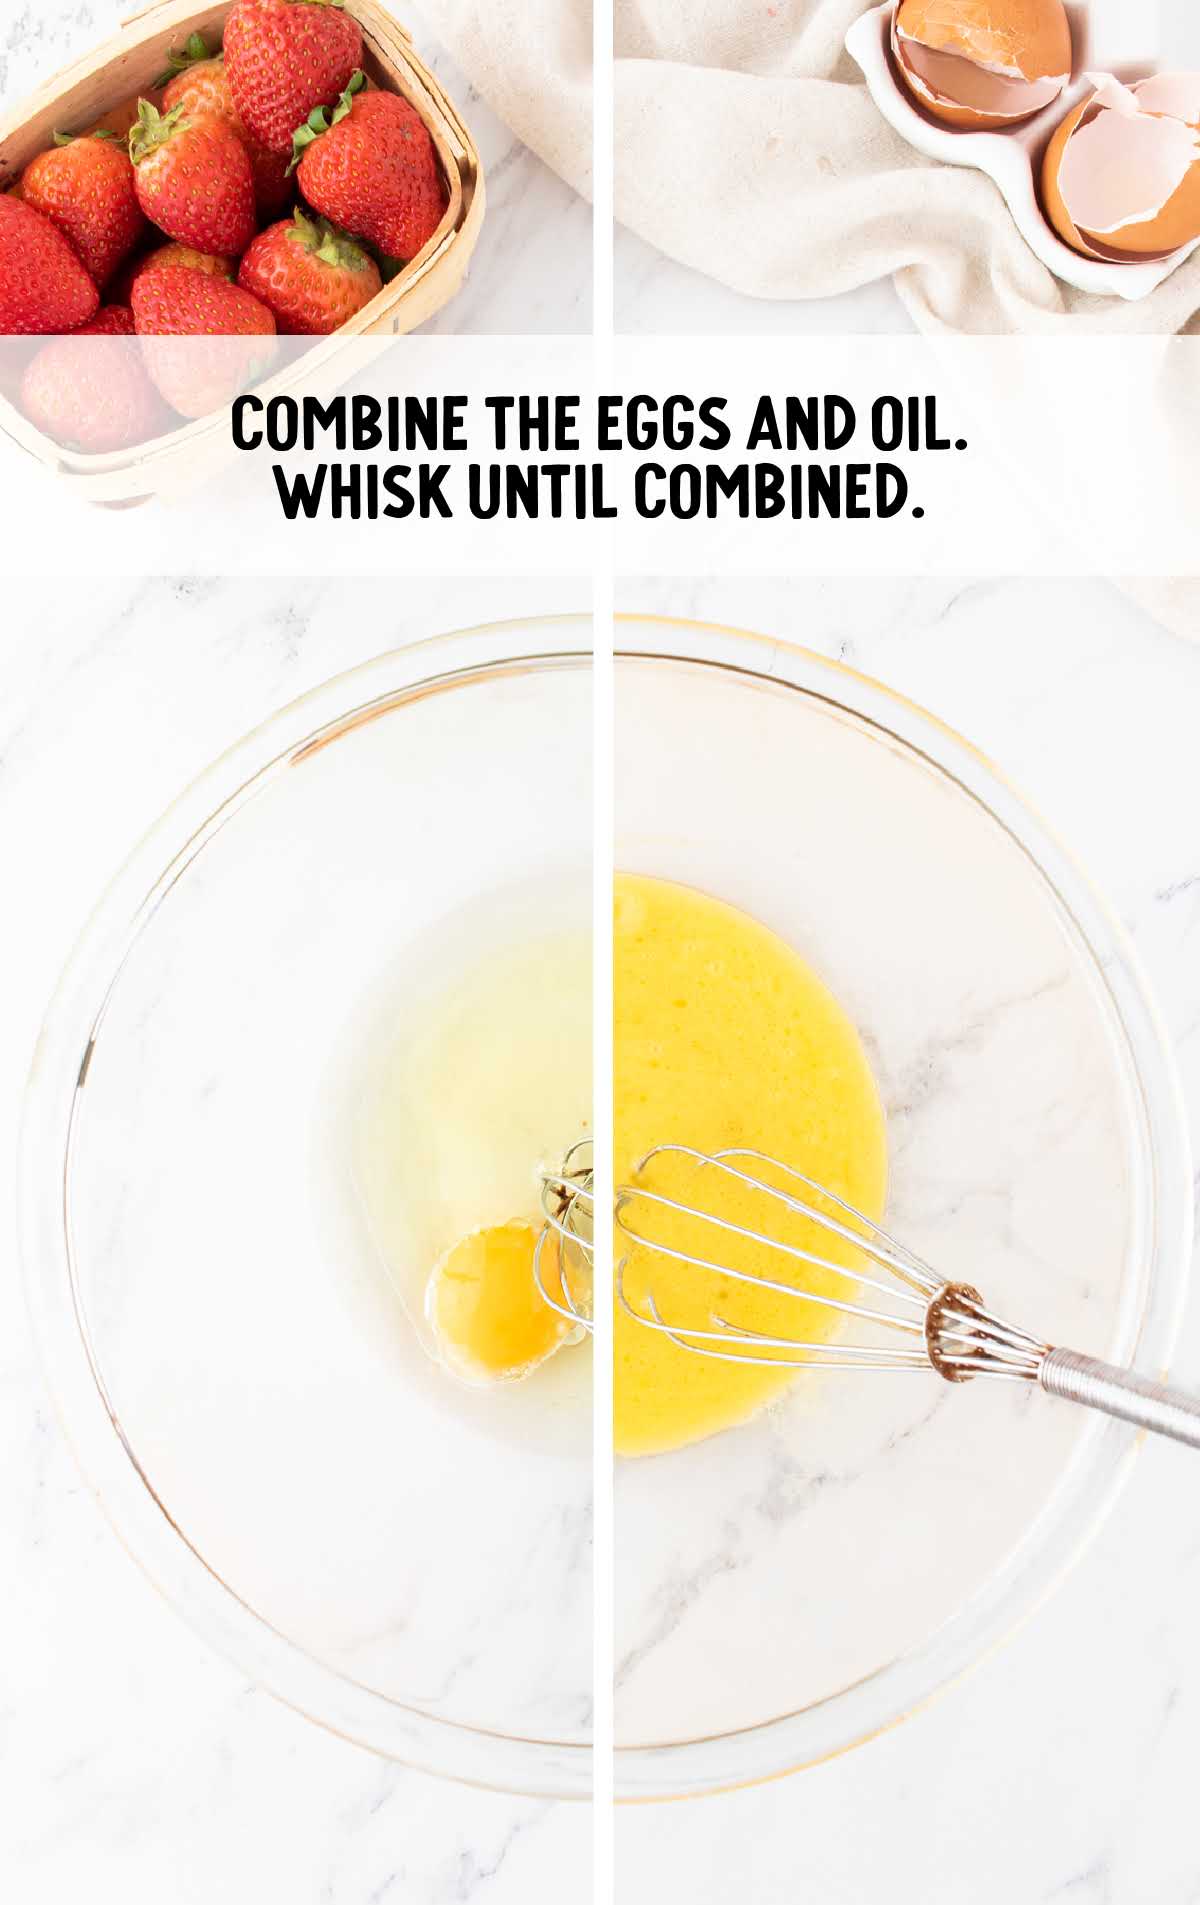 eggs and oil combined together